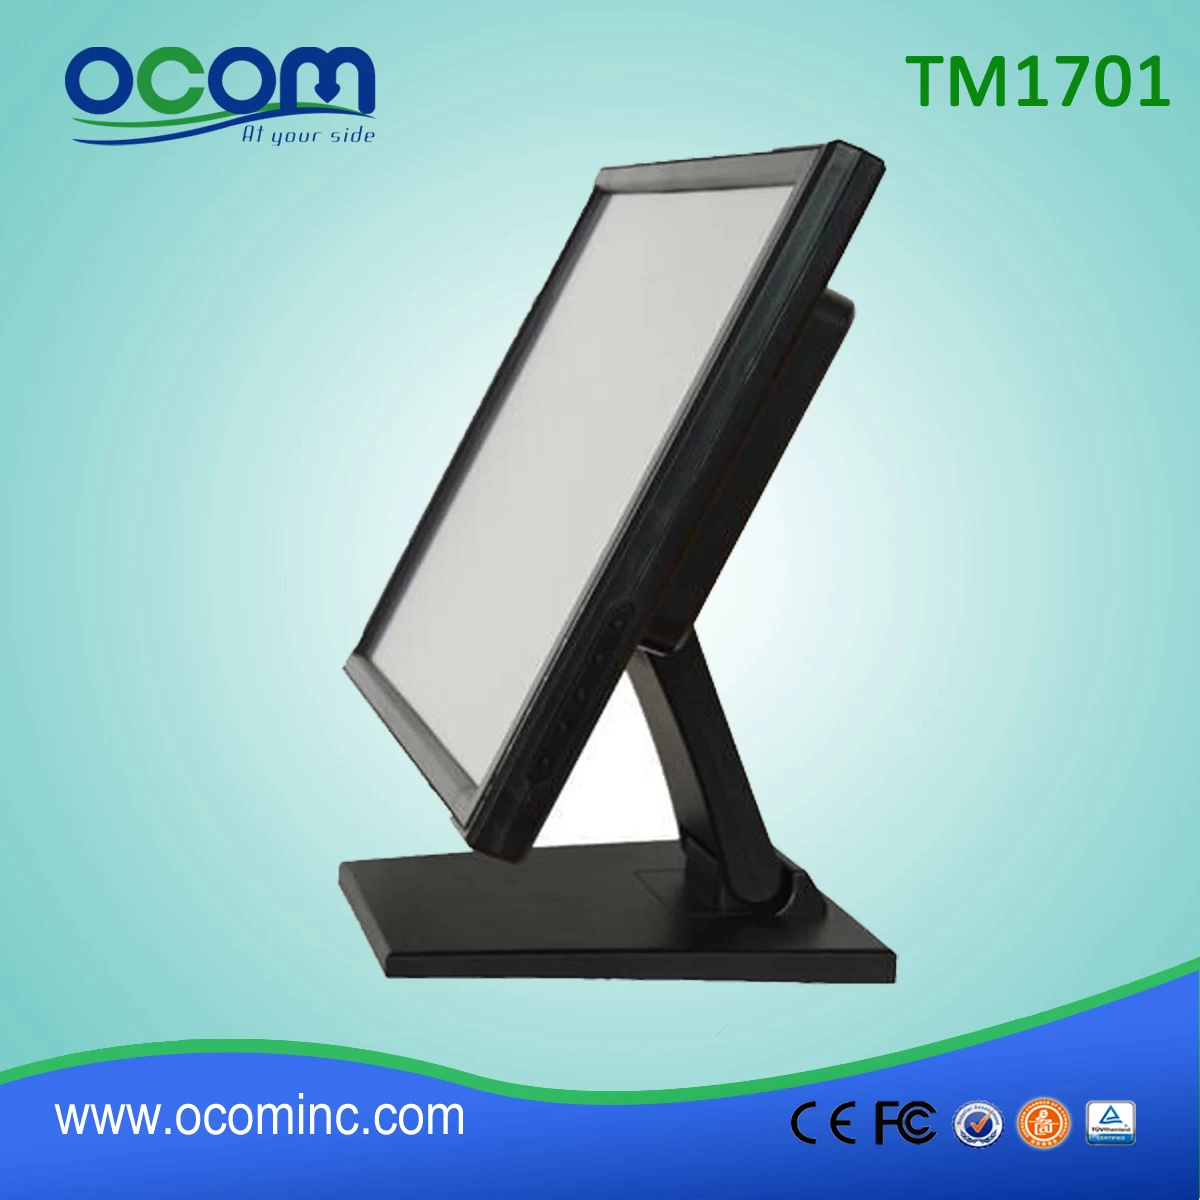 TM1701 Flexible POS System Touch LCD Screen